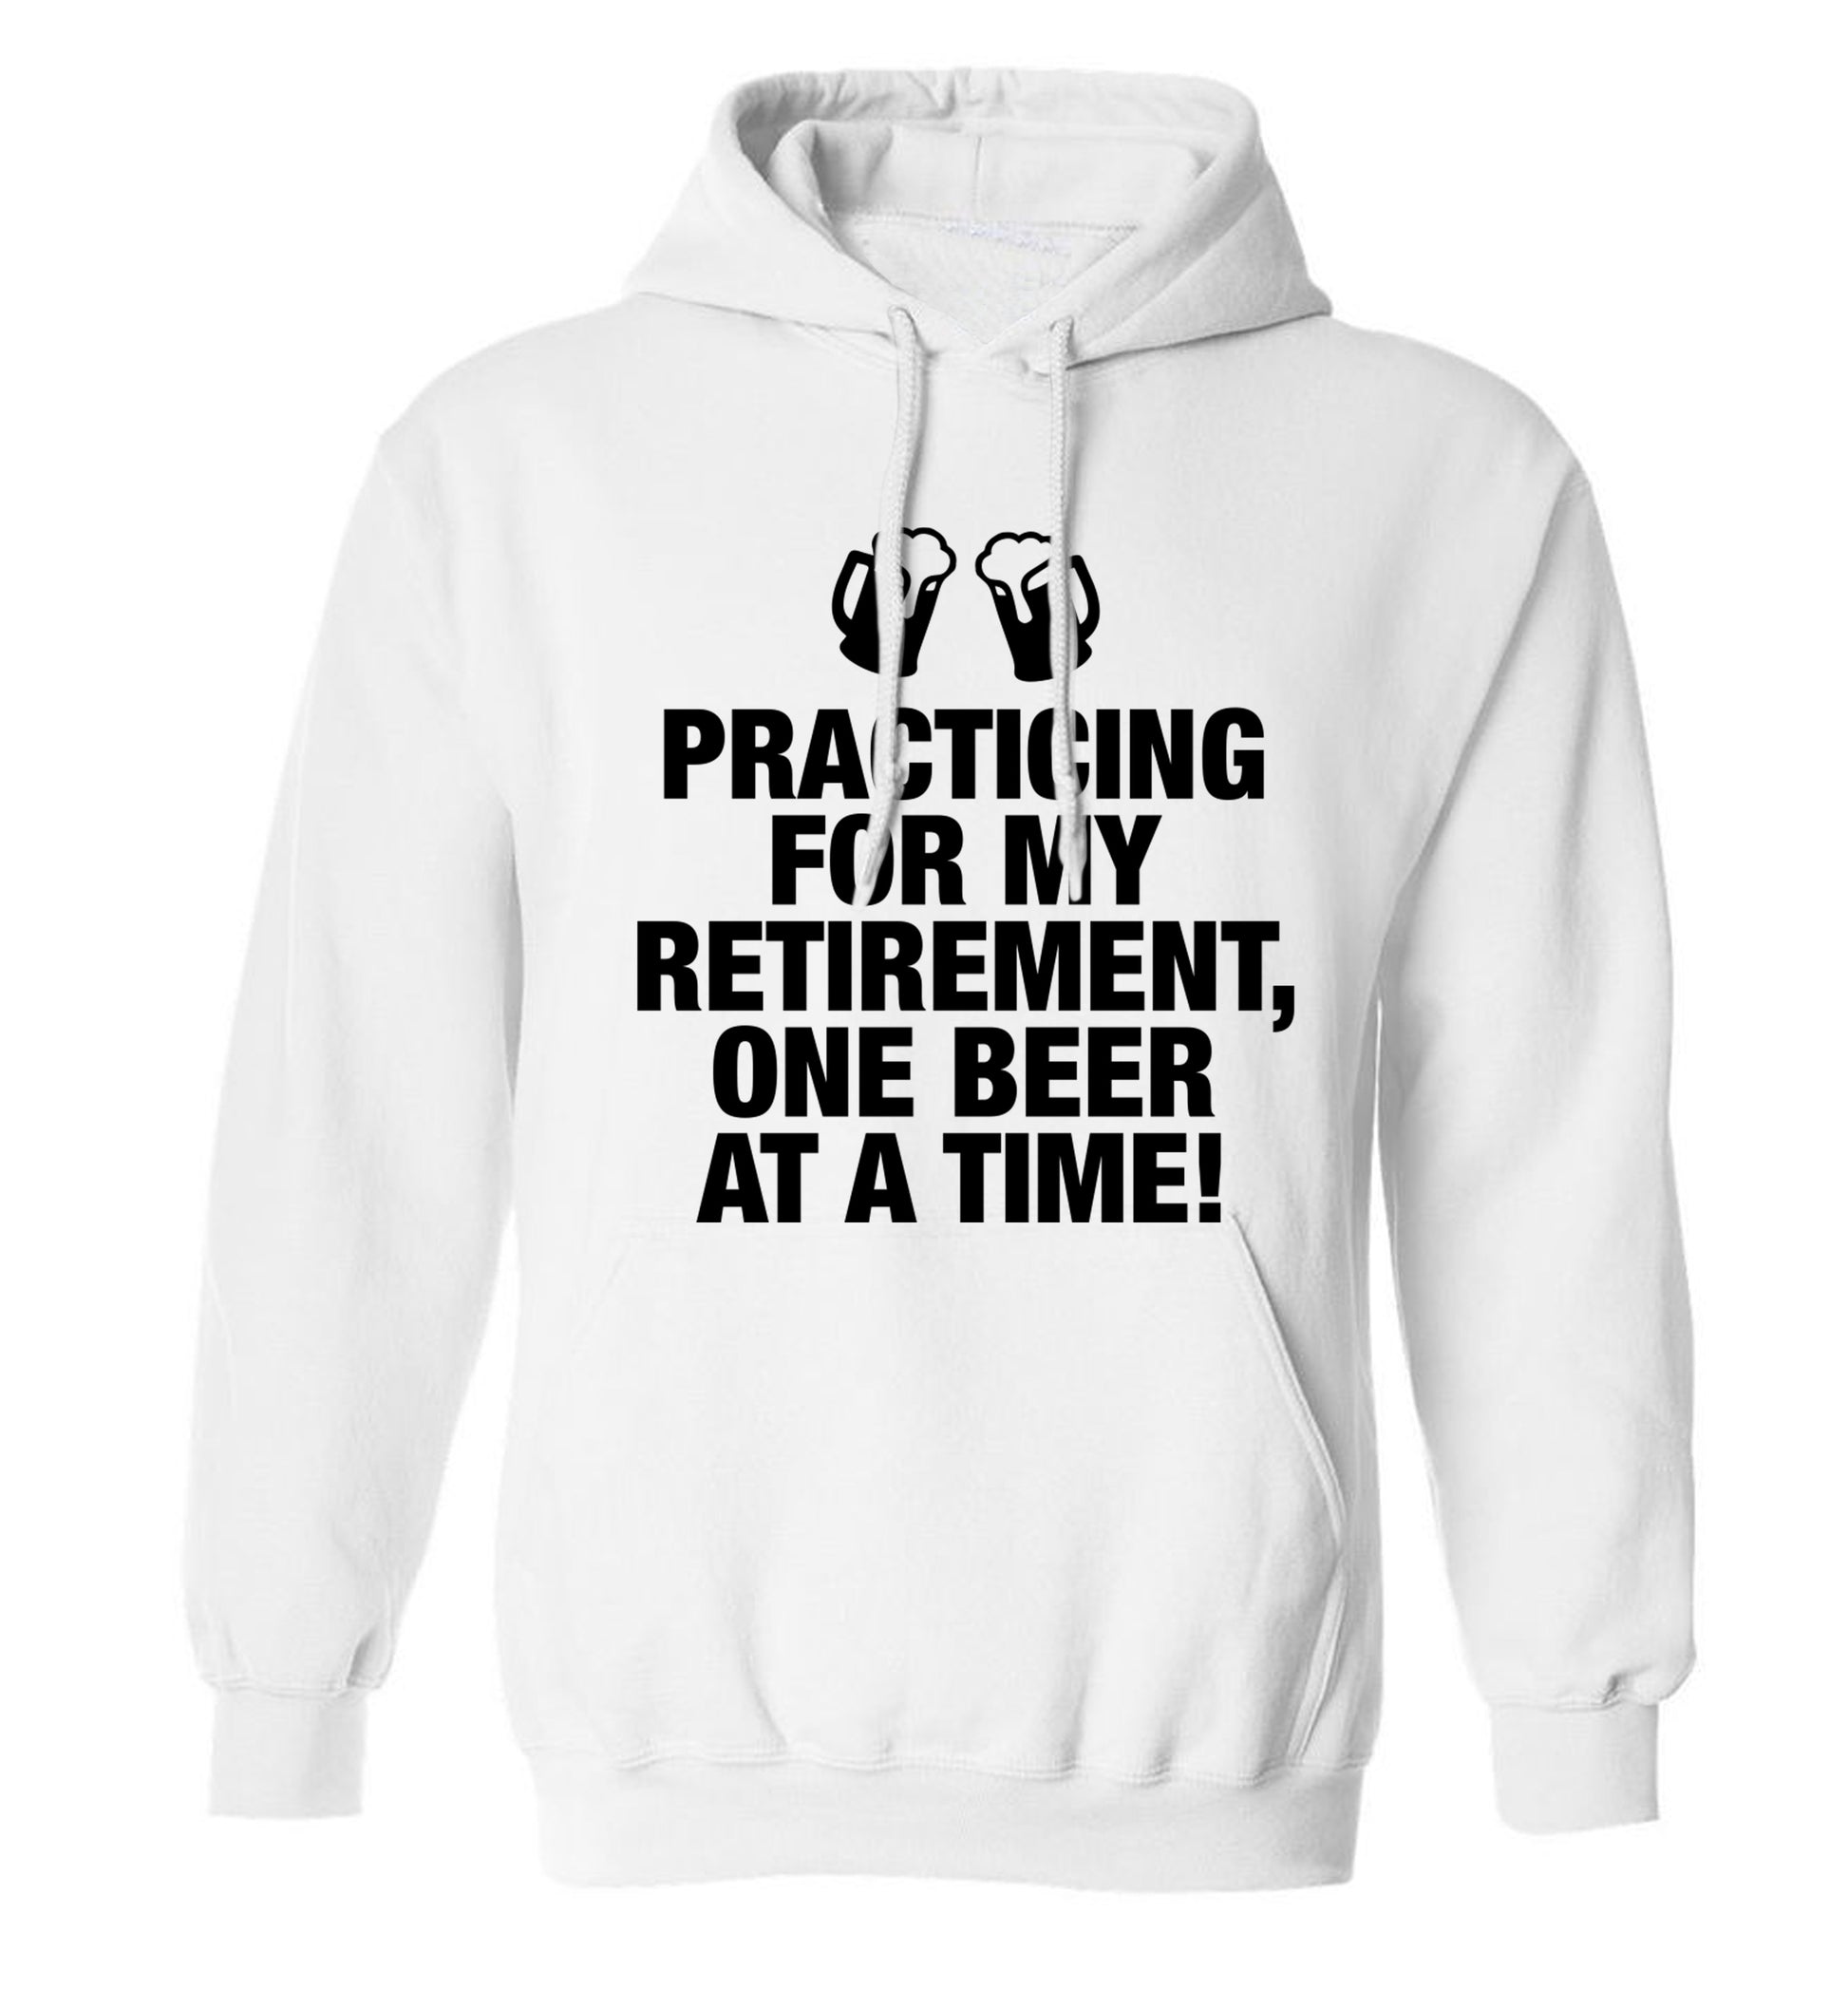 Practicing my retirement one beer at a time adults unisex white hoodie 2XL